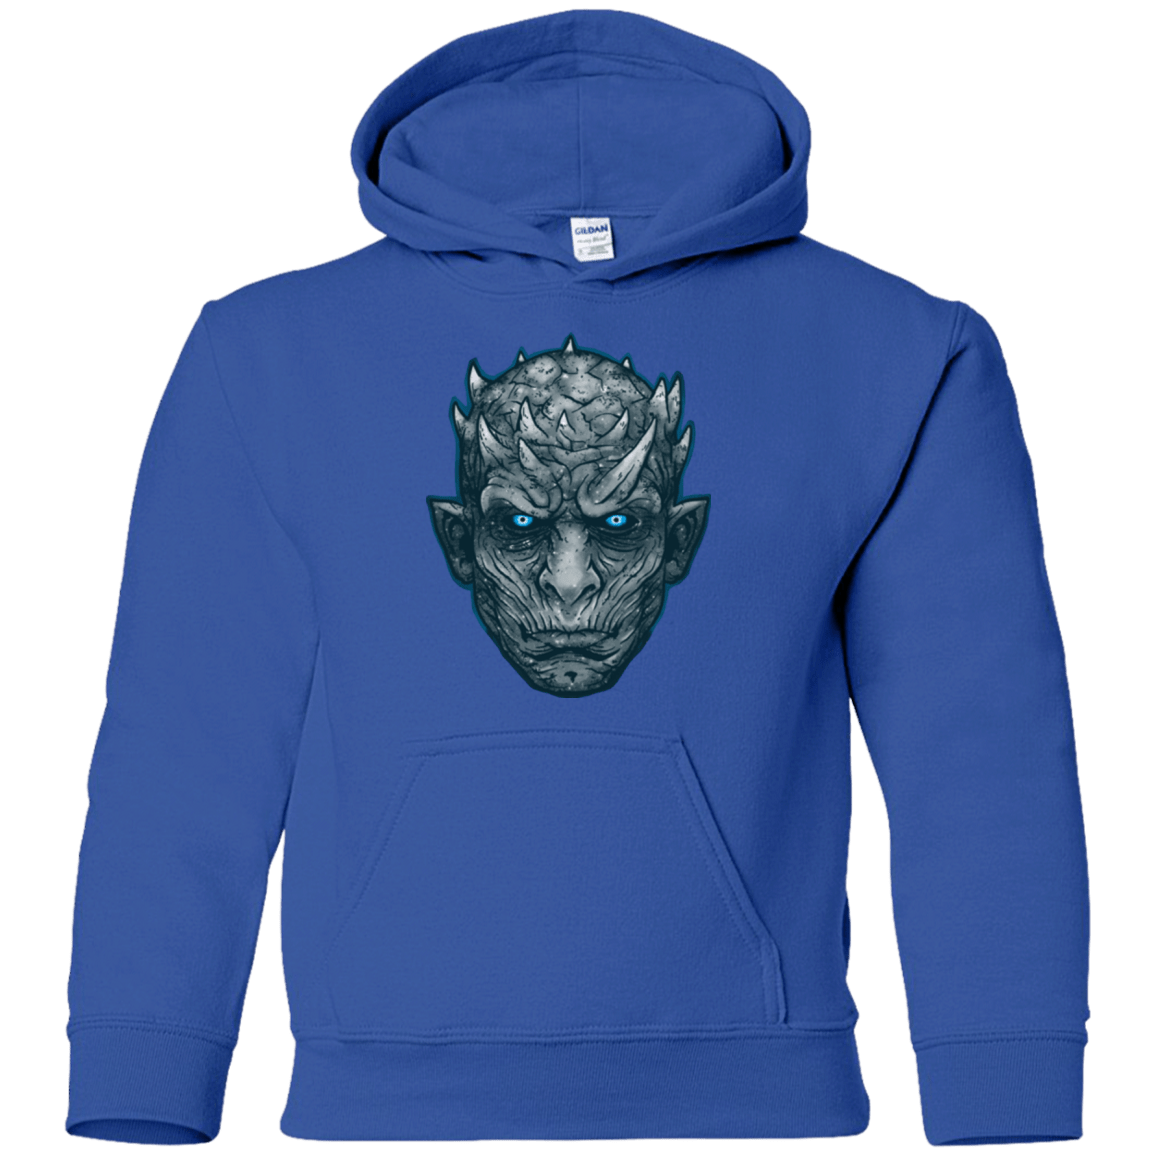 Sweatshirts Royal / YS The Other King2 Youth Hoodie